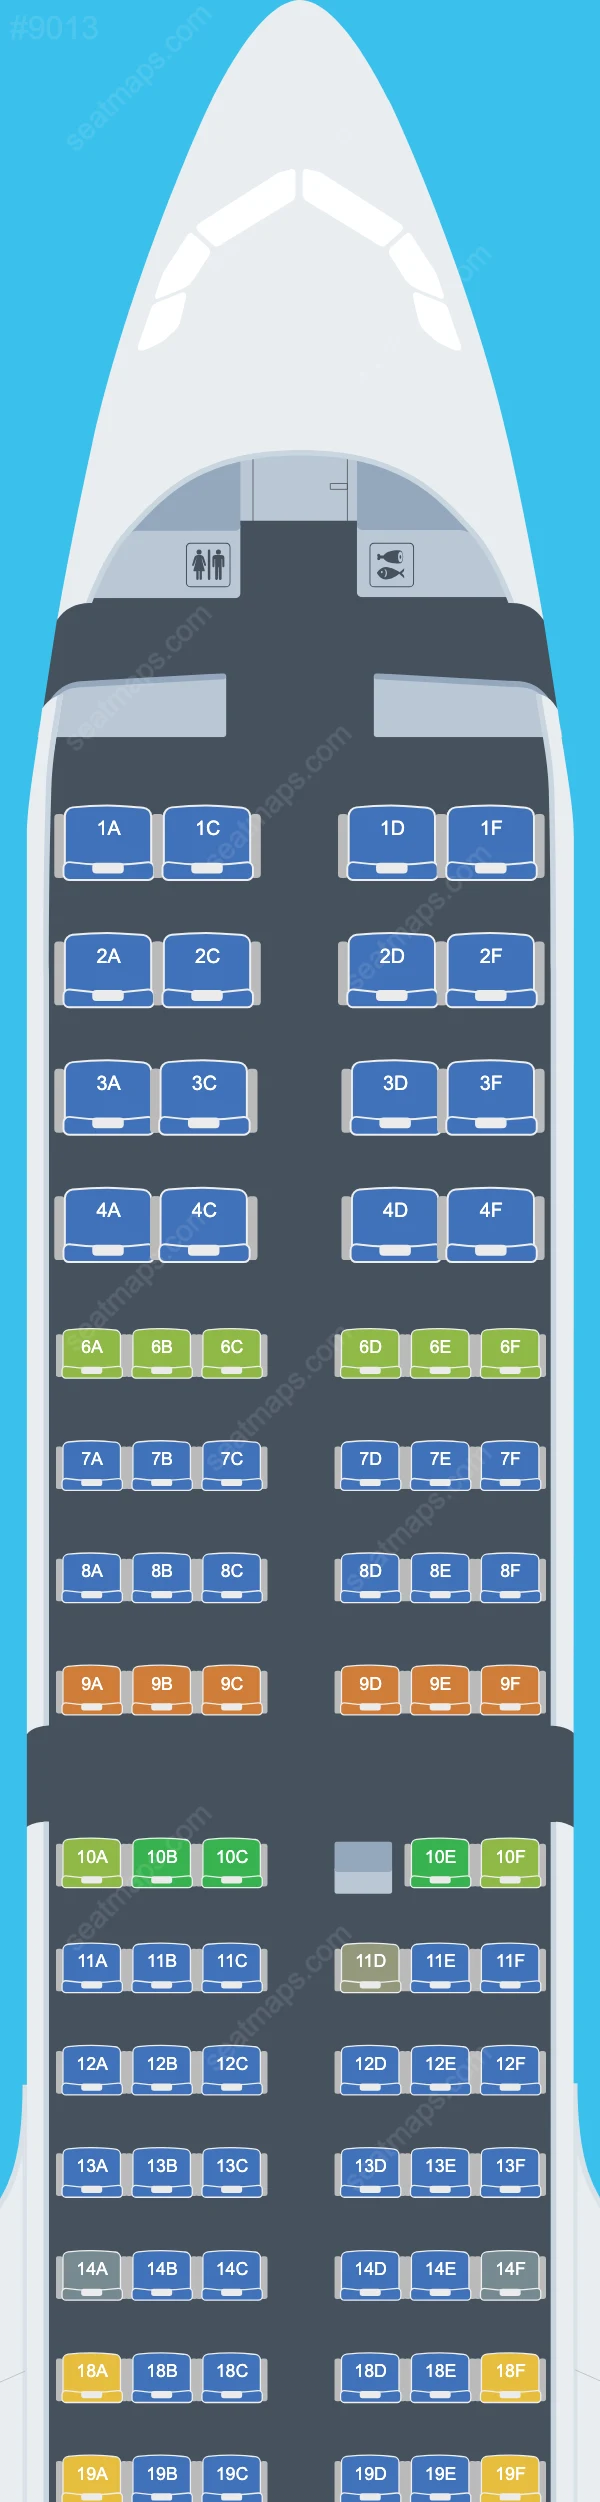 Alaska Airlines Airbus A321 Seat Maps A321-200neo